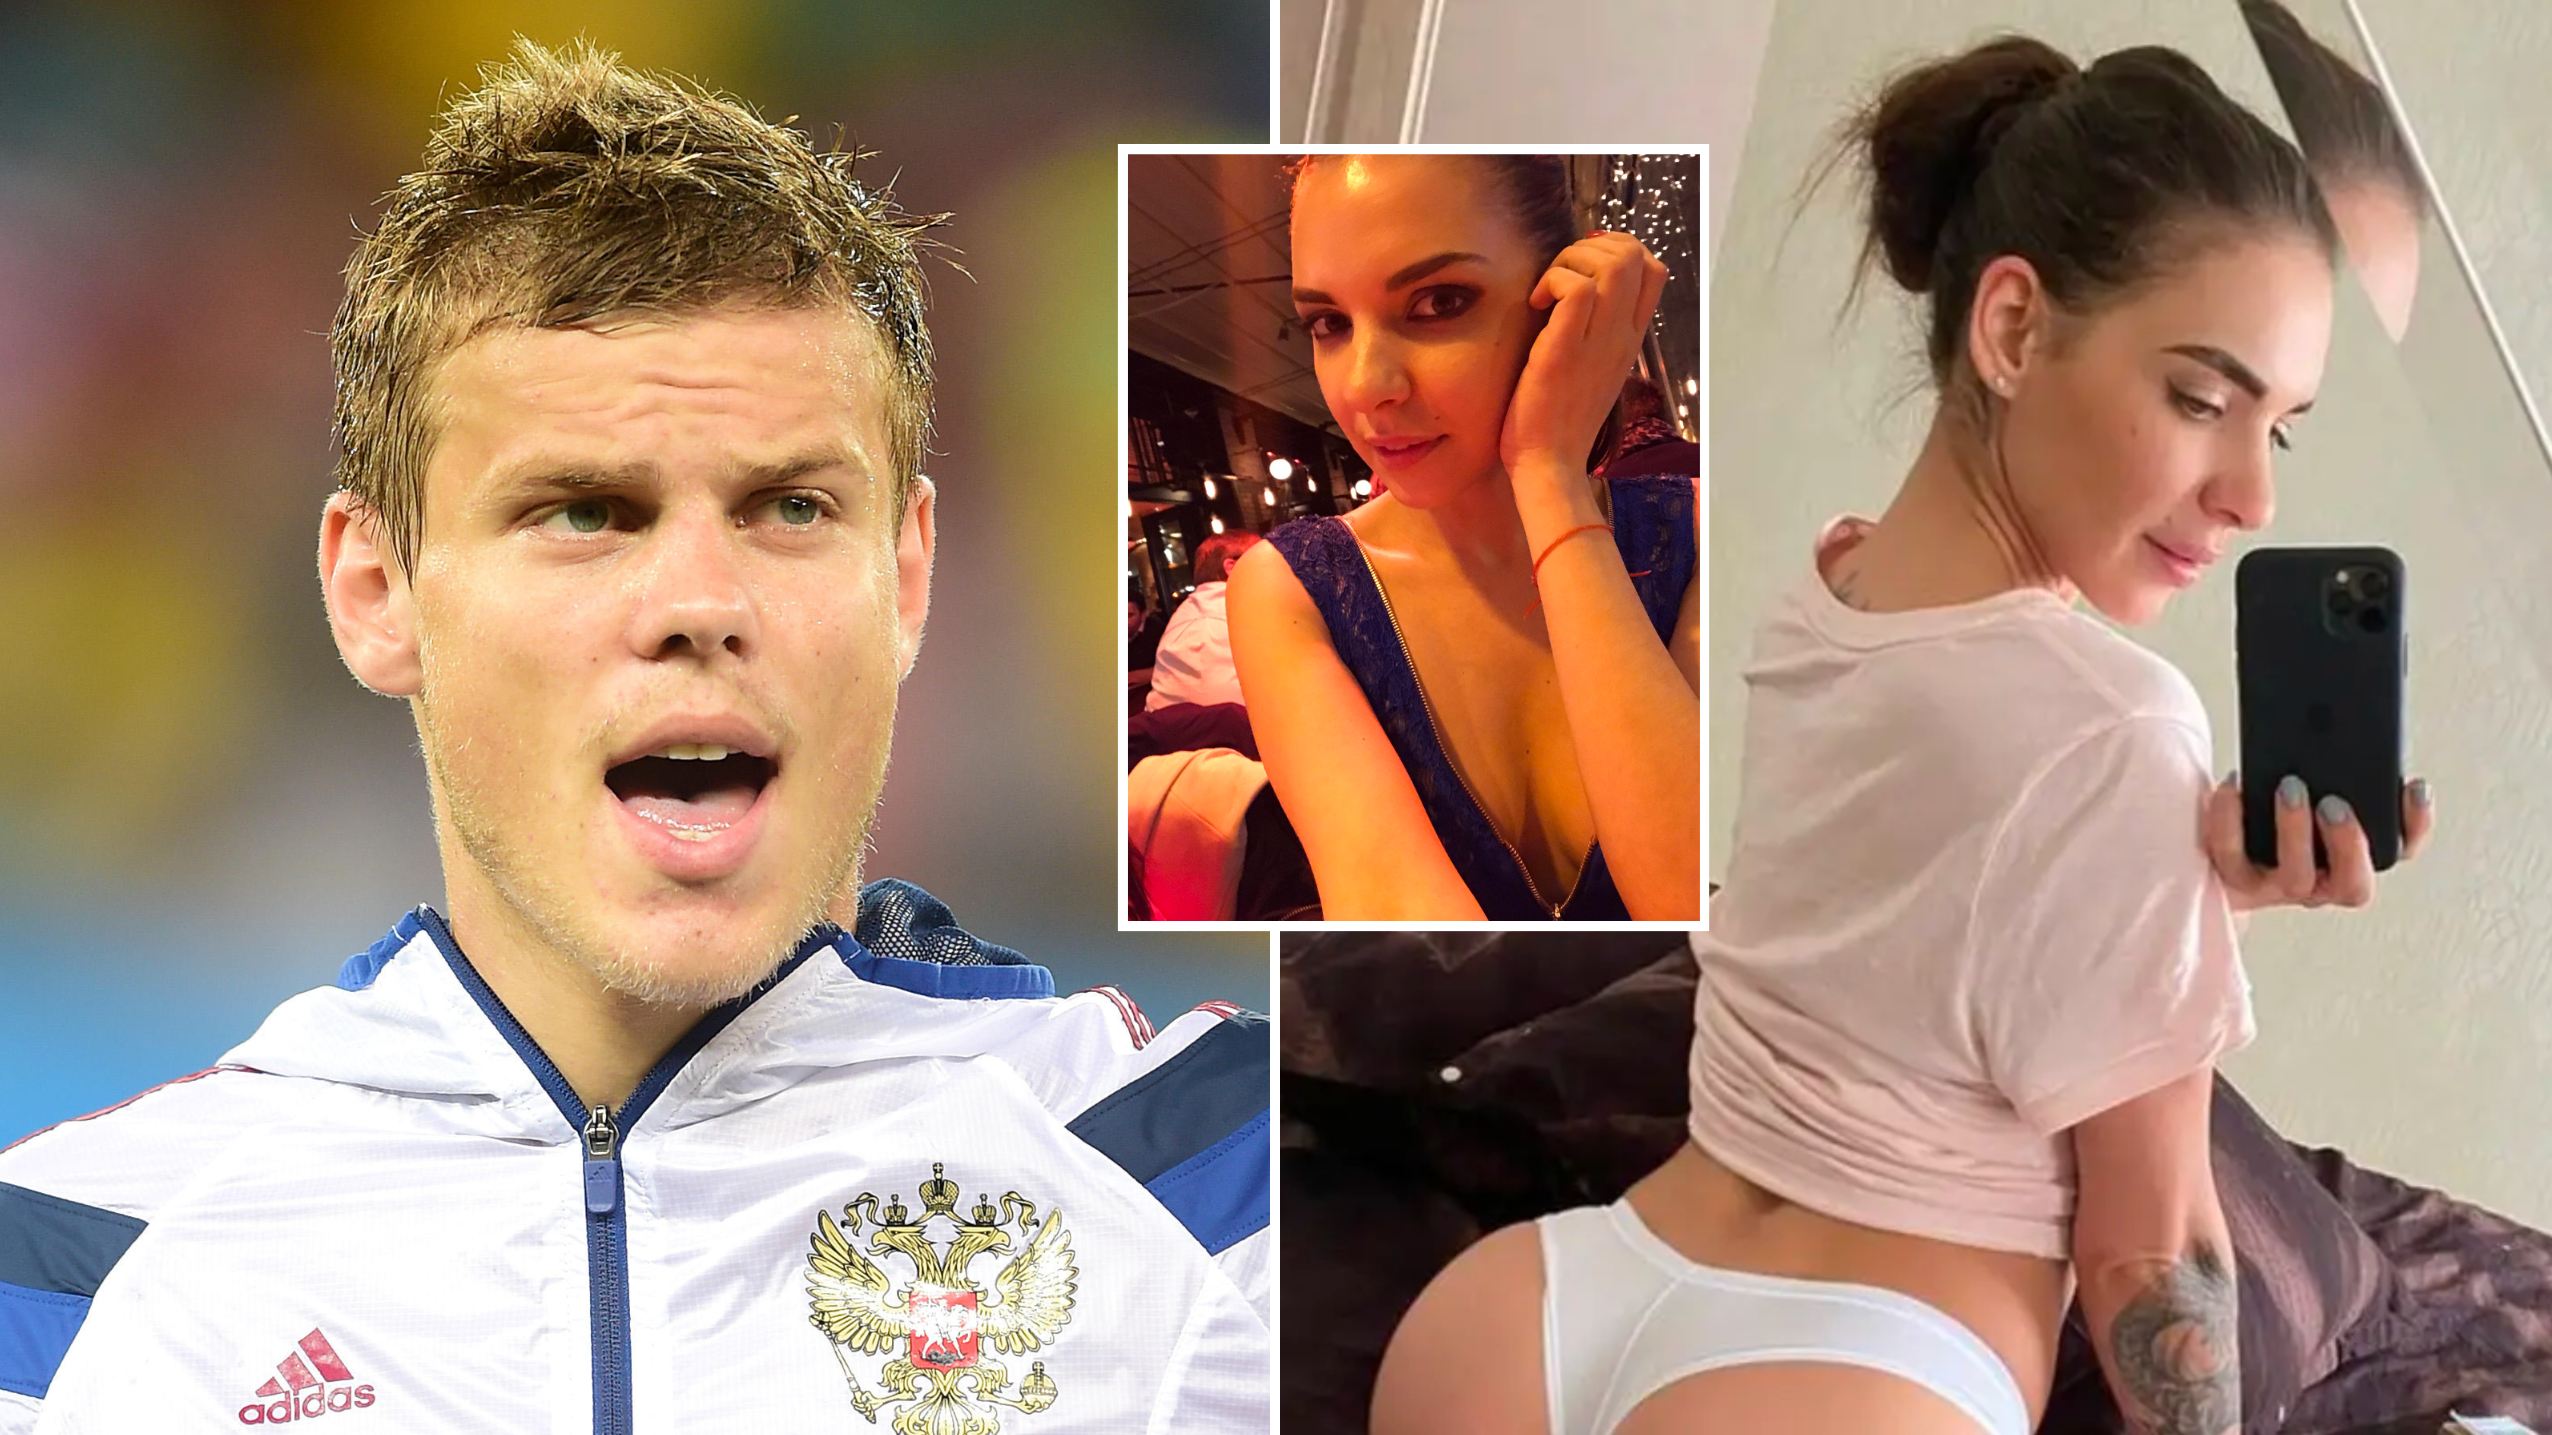 Russian Footballer Offered 16-Hour Sex Session By Porn Star If He Scored Five Goals pic